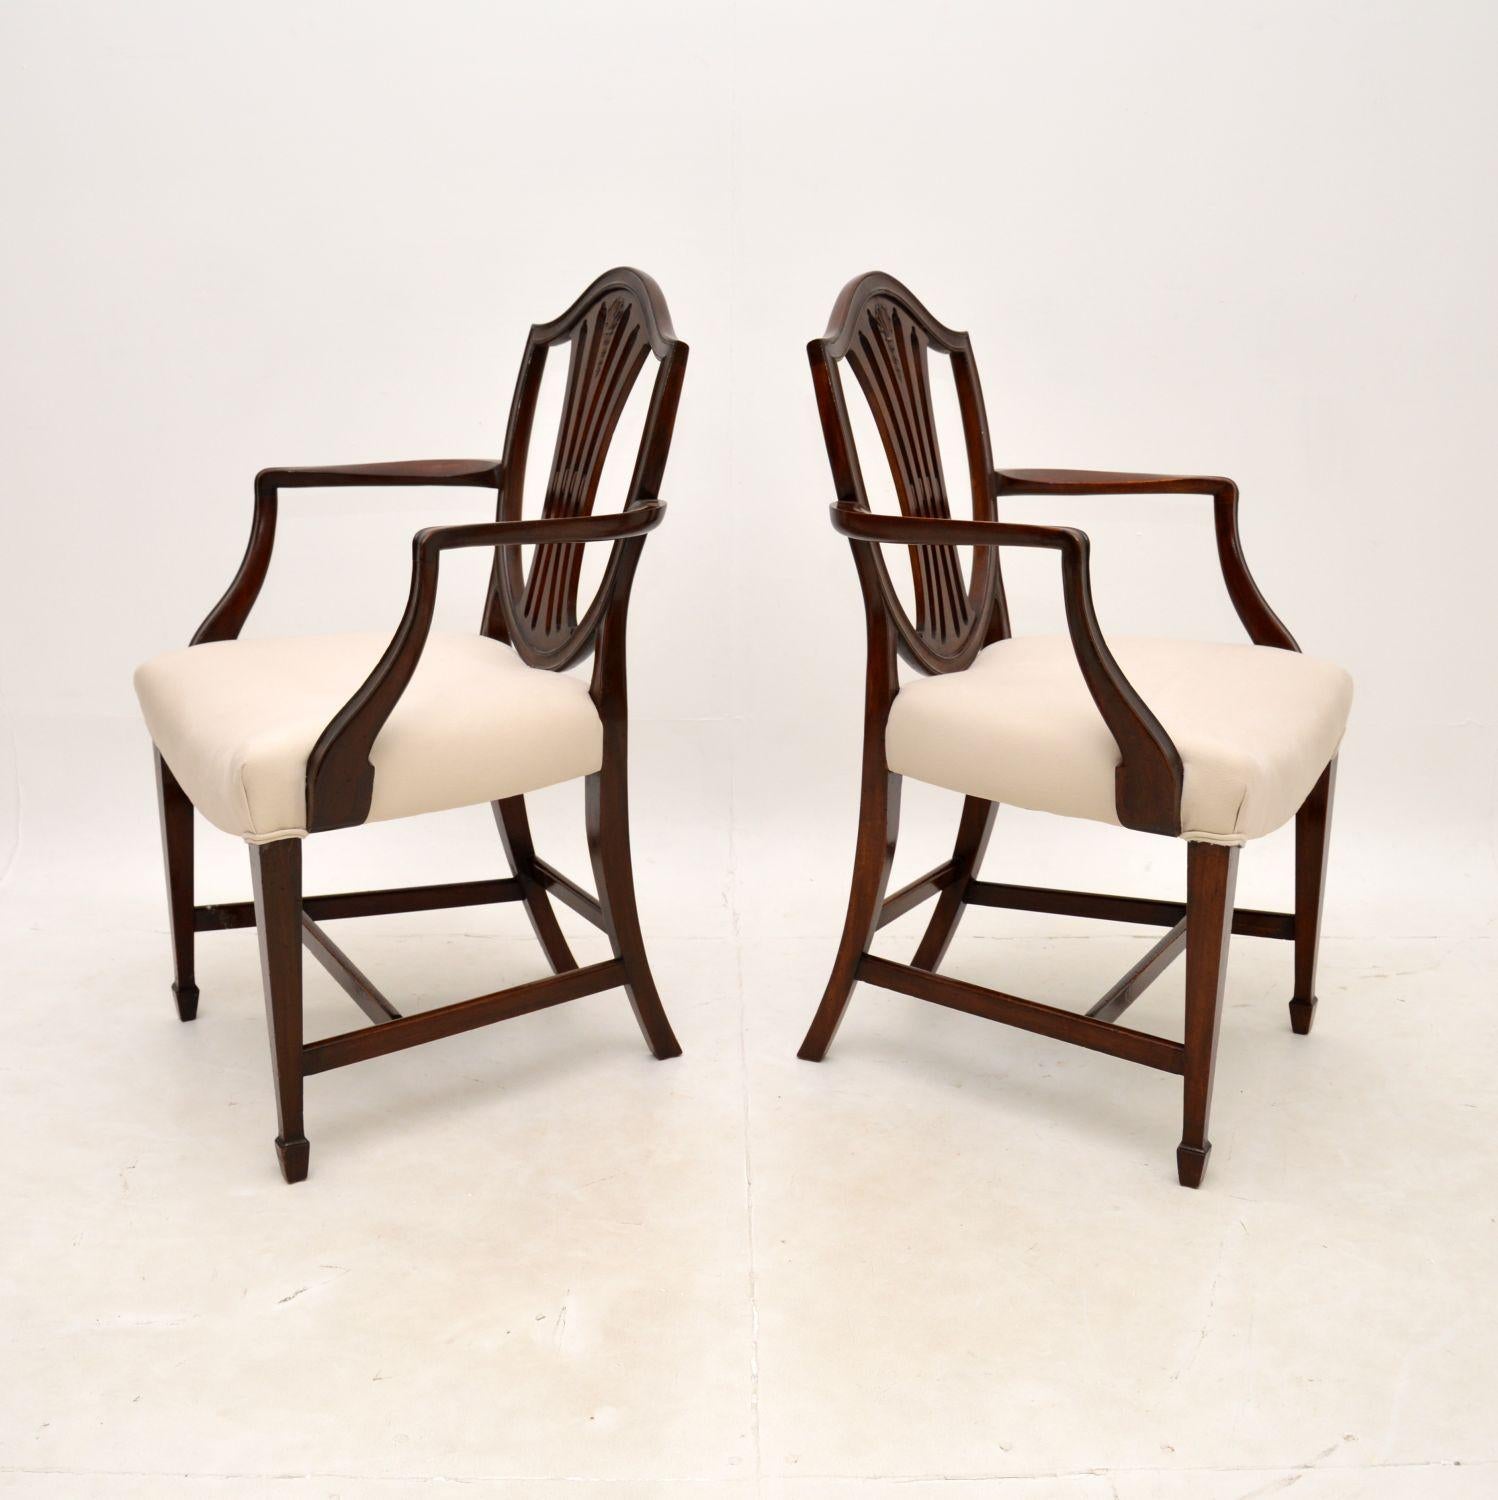 British Pair of Antique Georgian Style Carver Armchairs For Sale